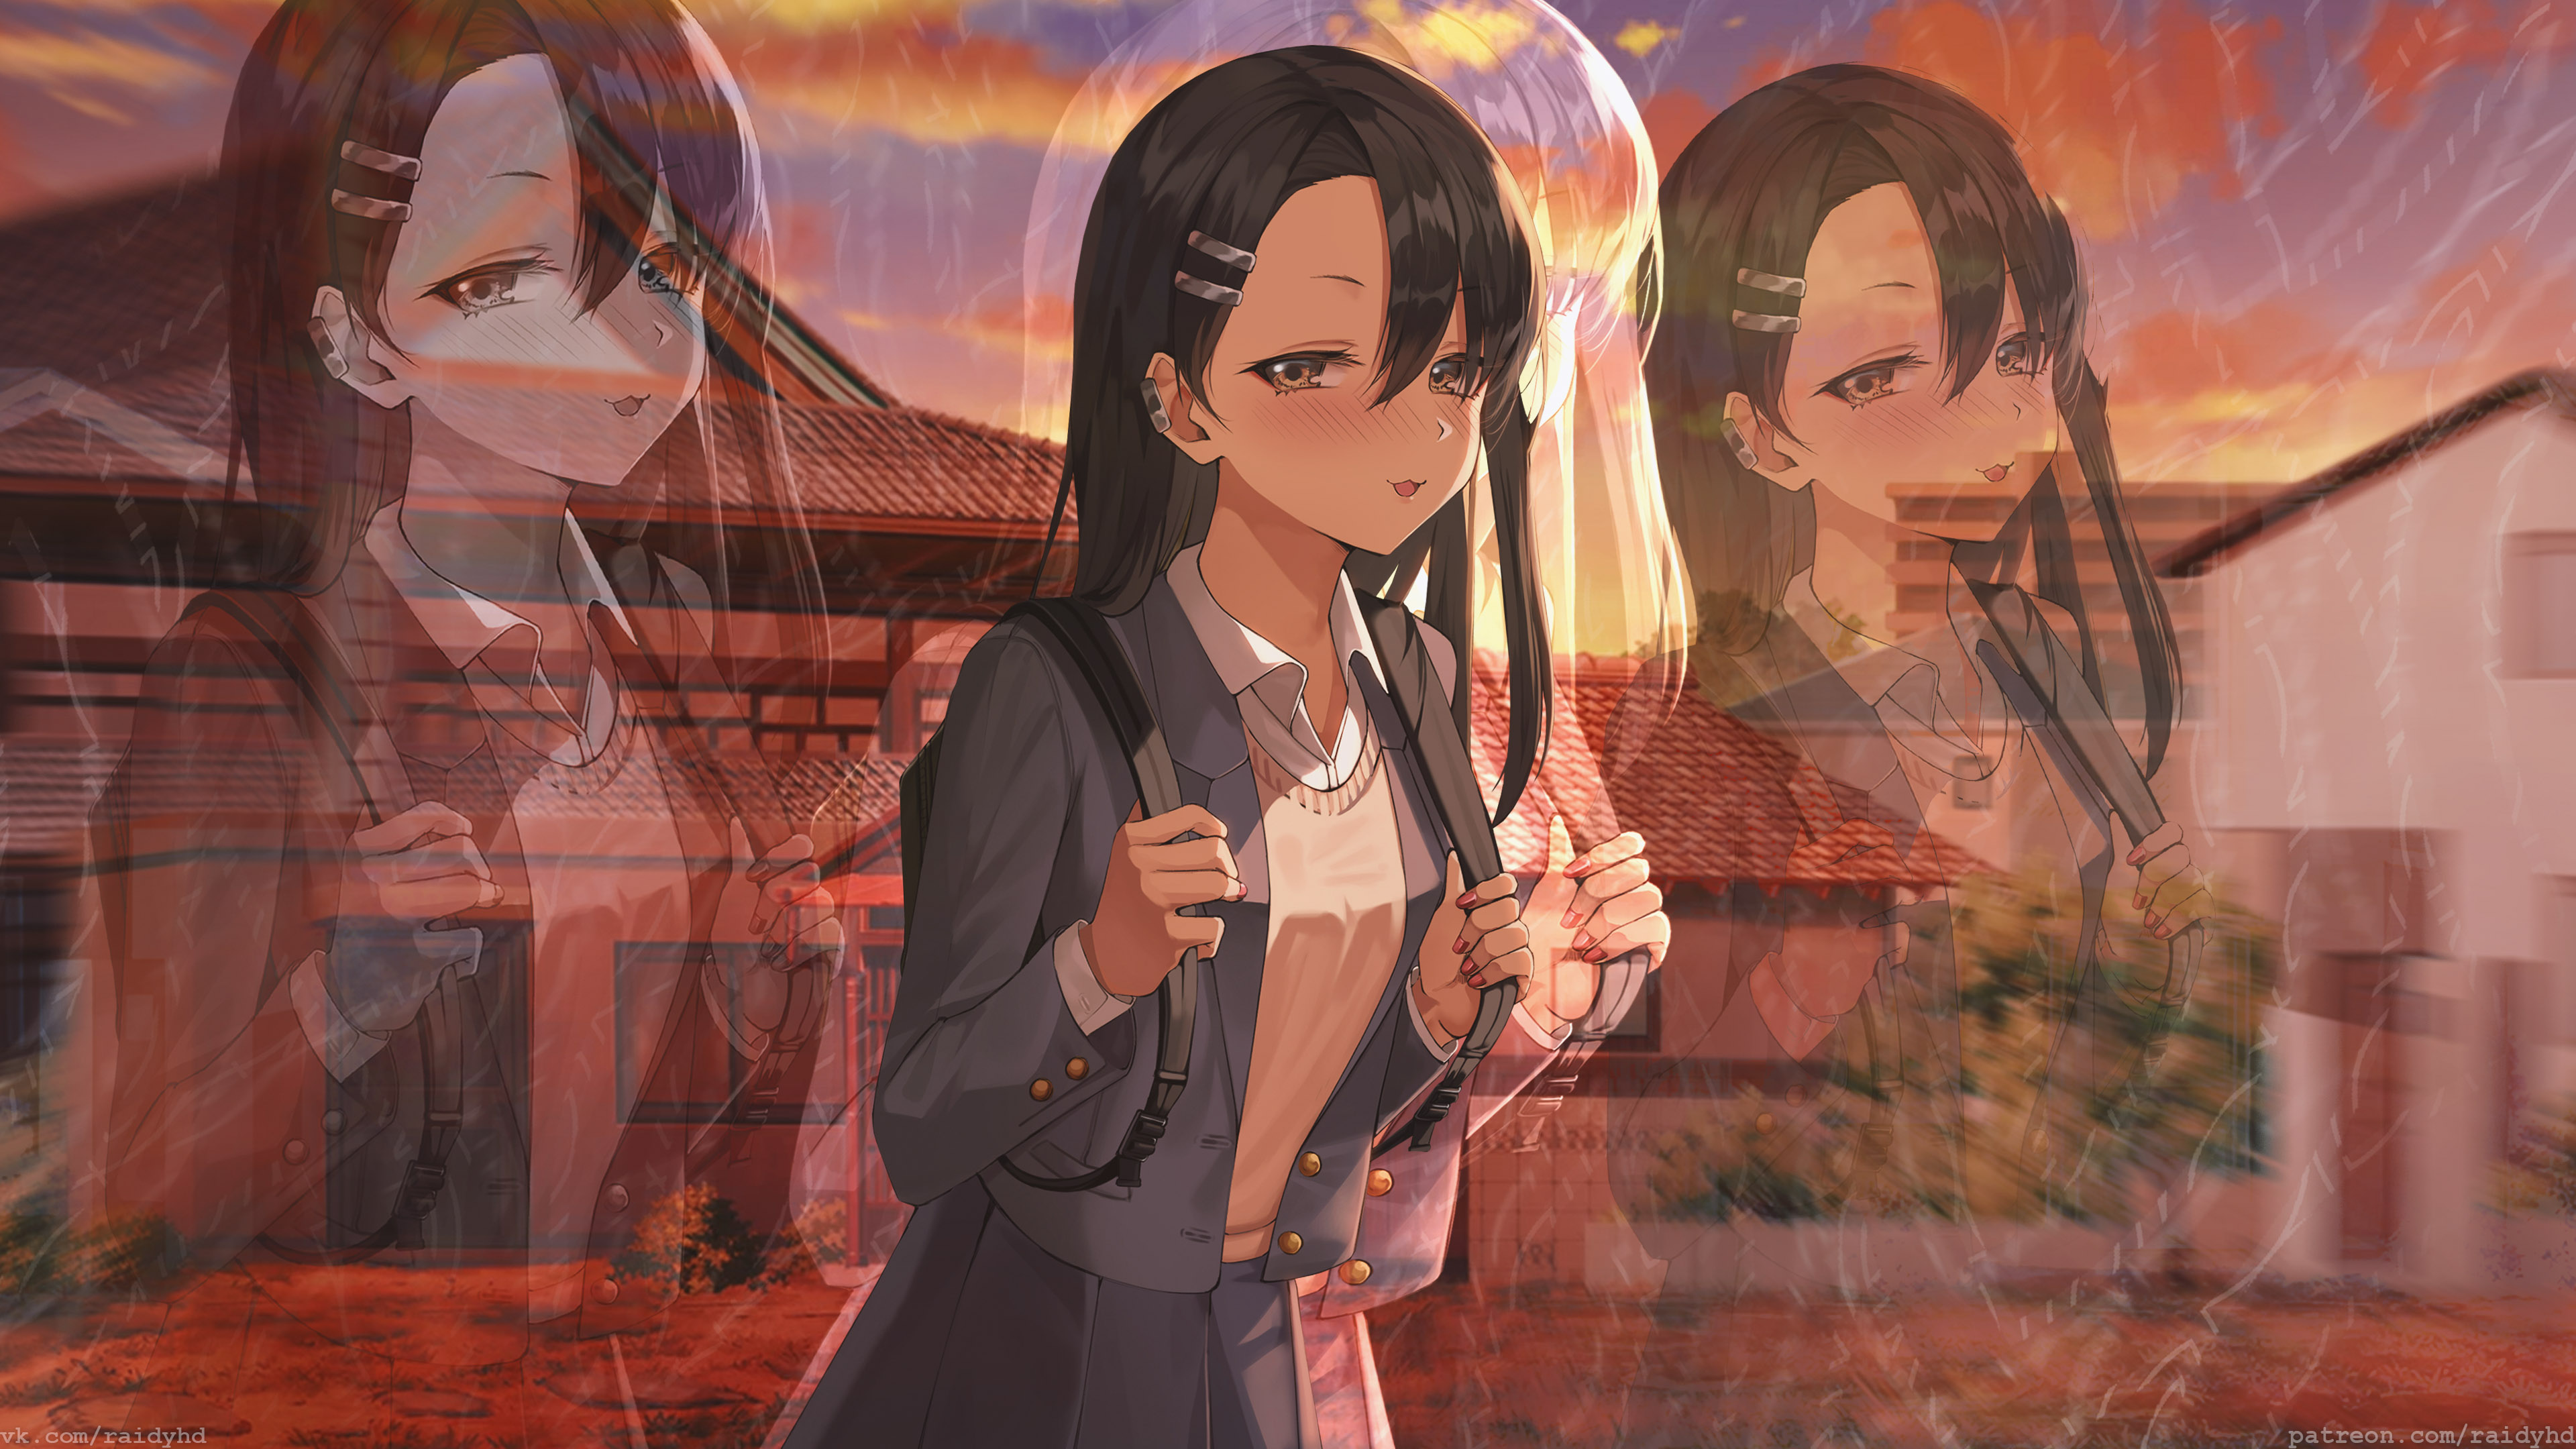 Anime 3840x2160 anime anime girls picture-in-picture Nagatoro Hayase Please don't bully me, Nagatoro watermarked